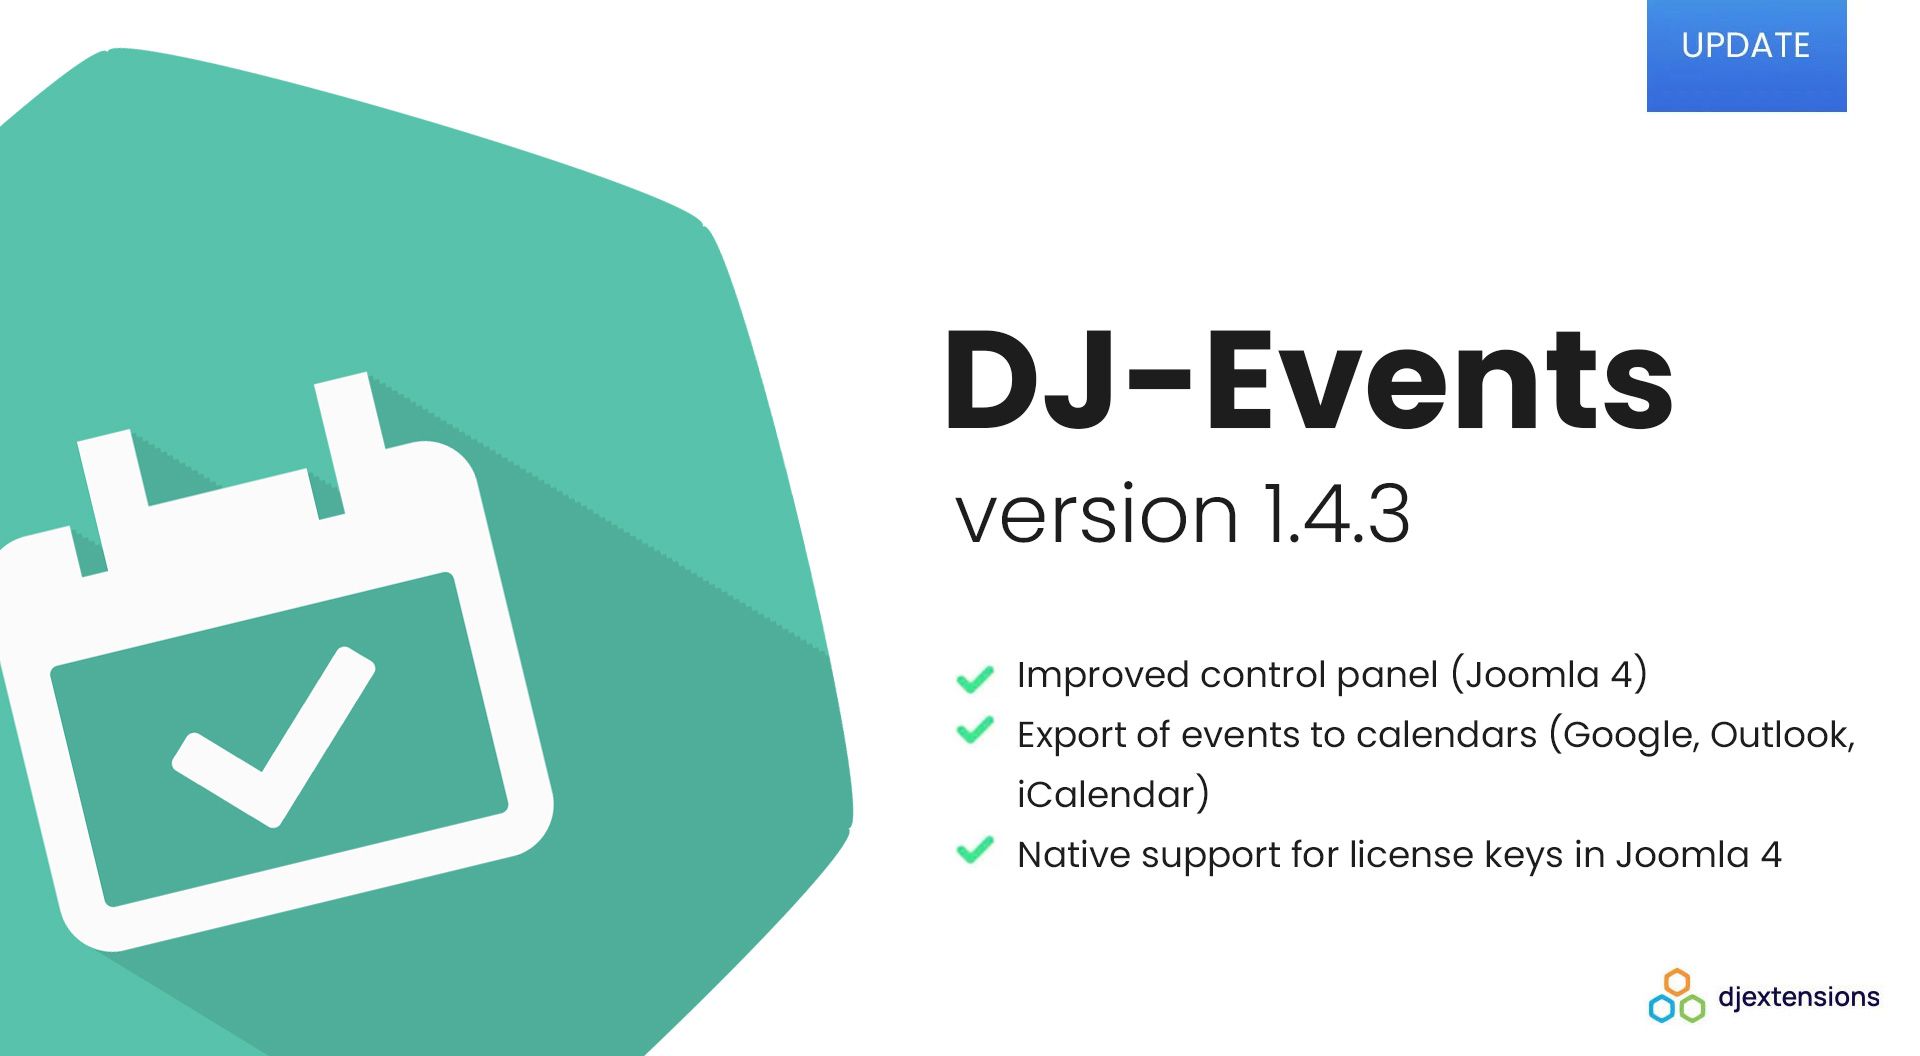 Improved DJ-Events with the export of events to calendars feature!